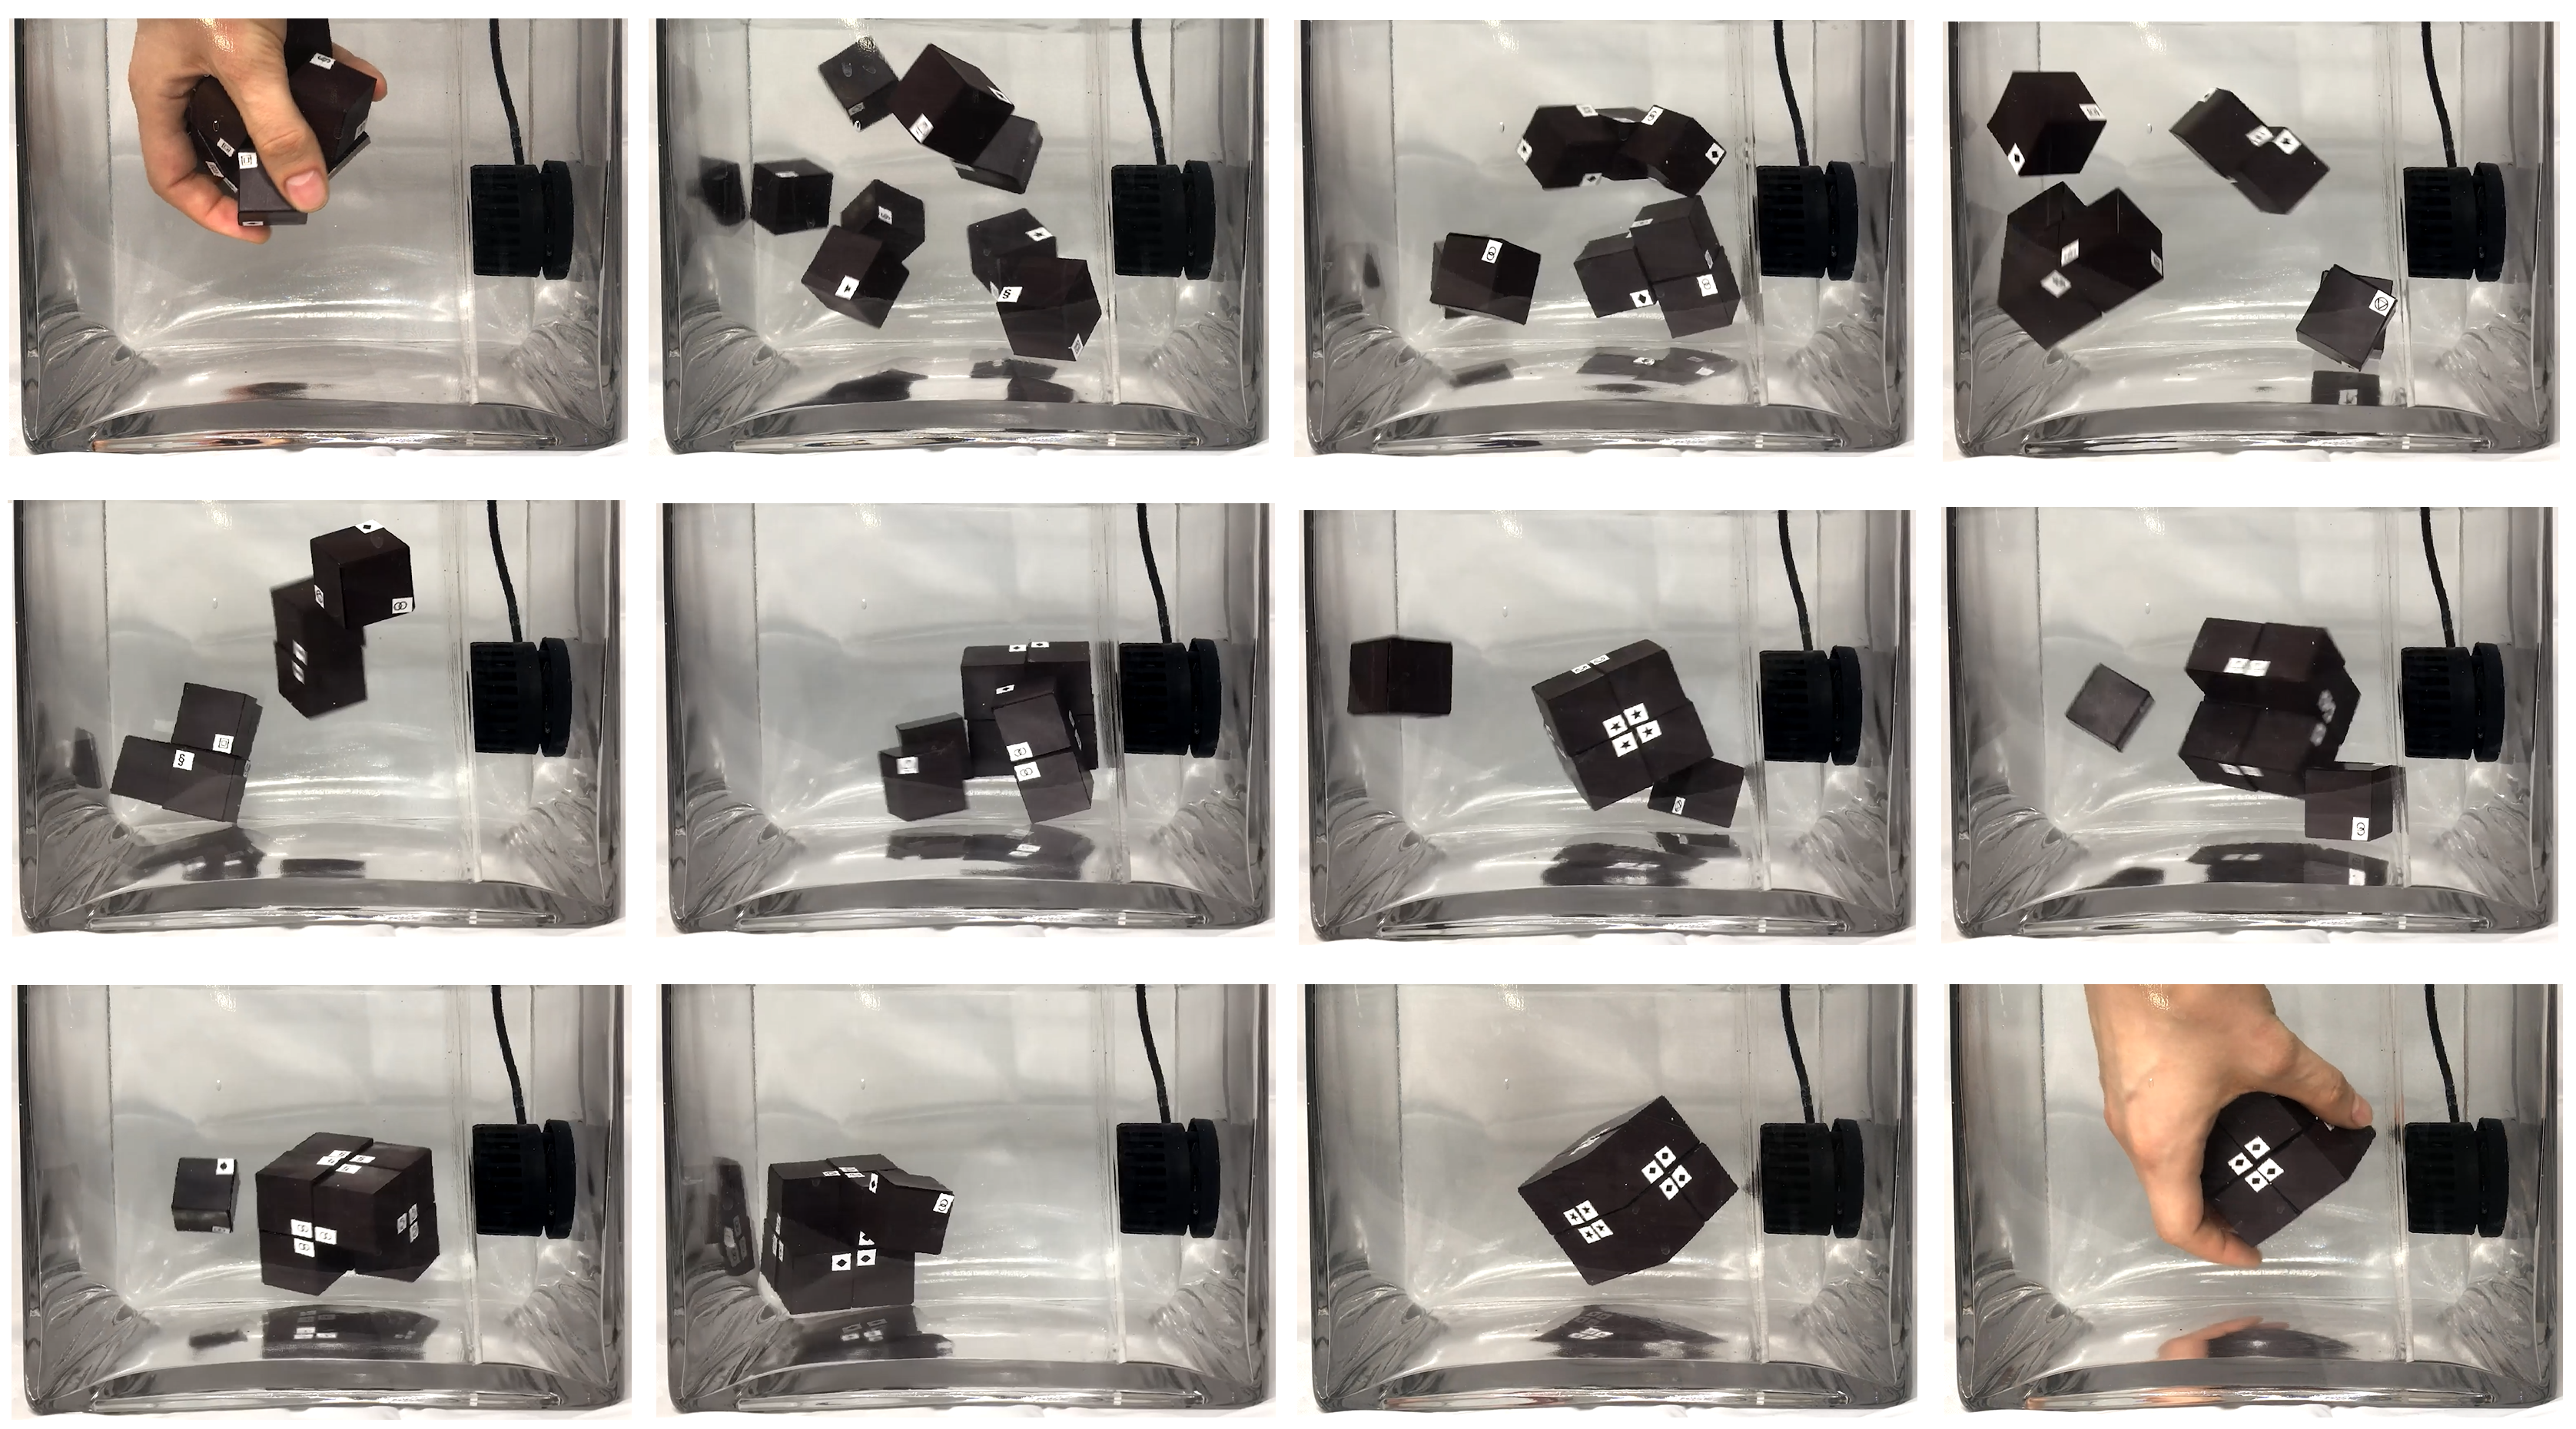 Magnetic cubes selectively self-assemble